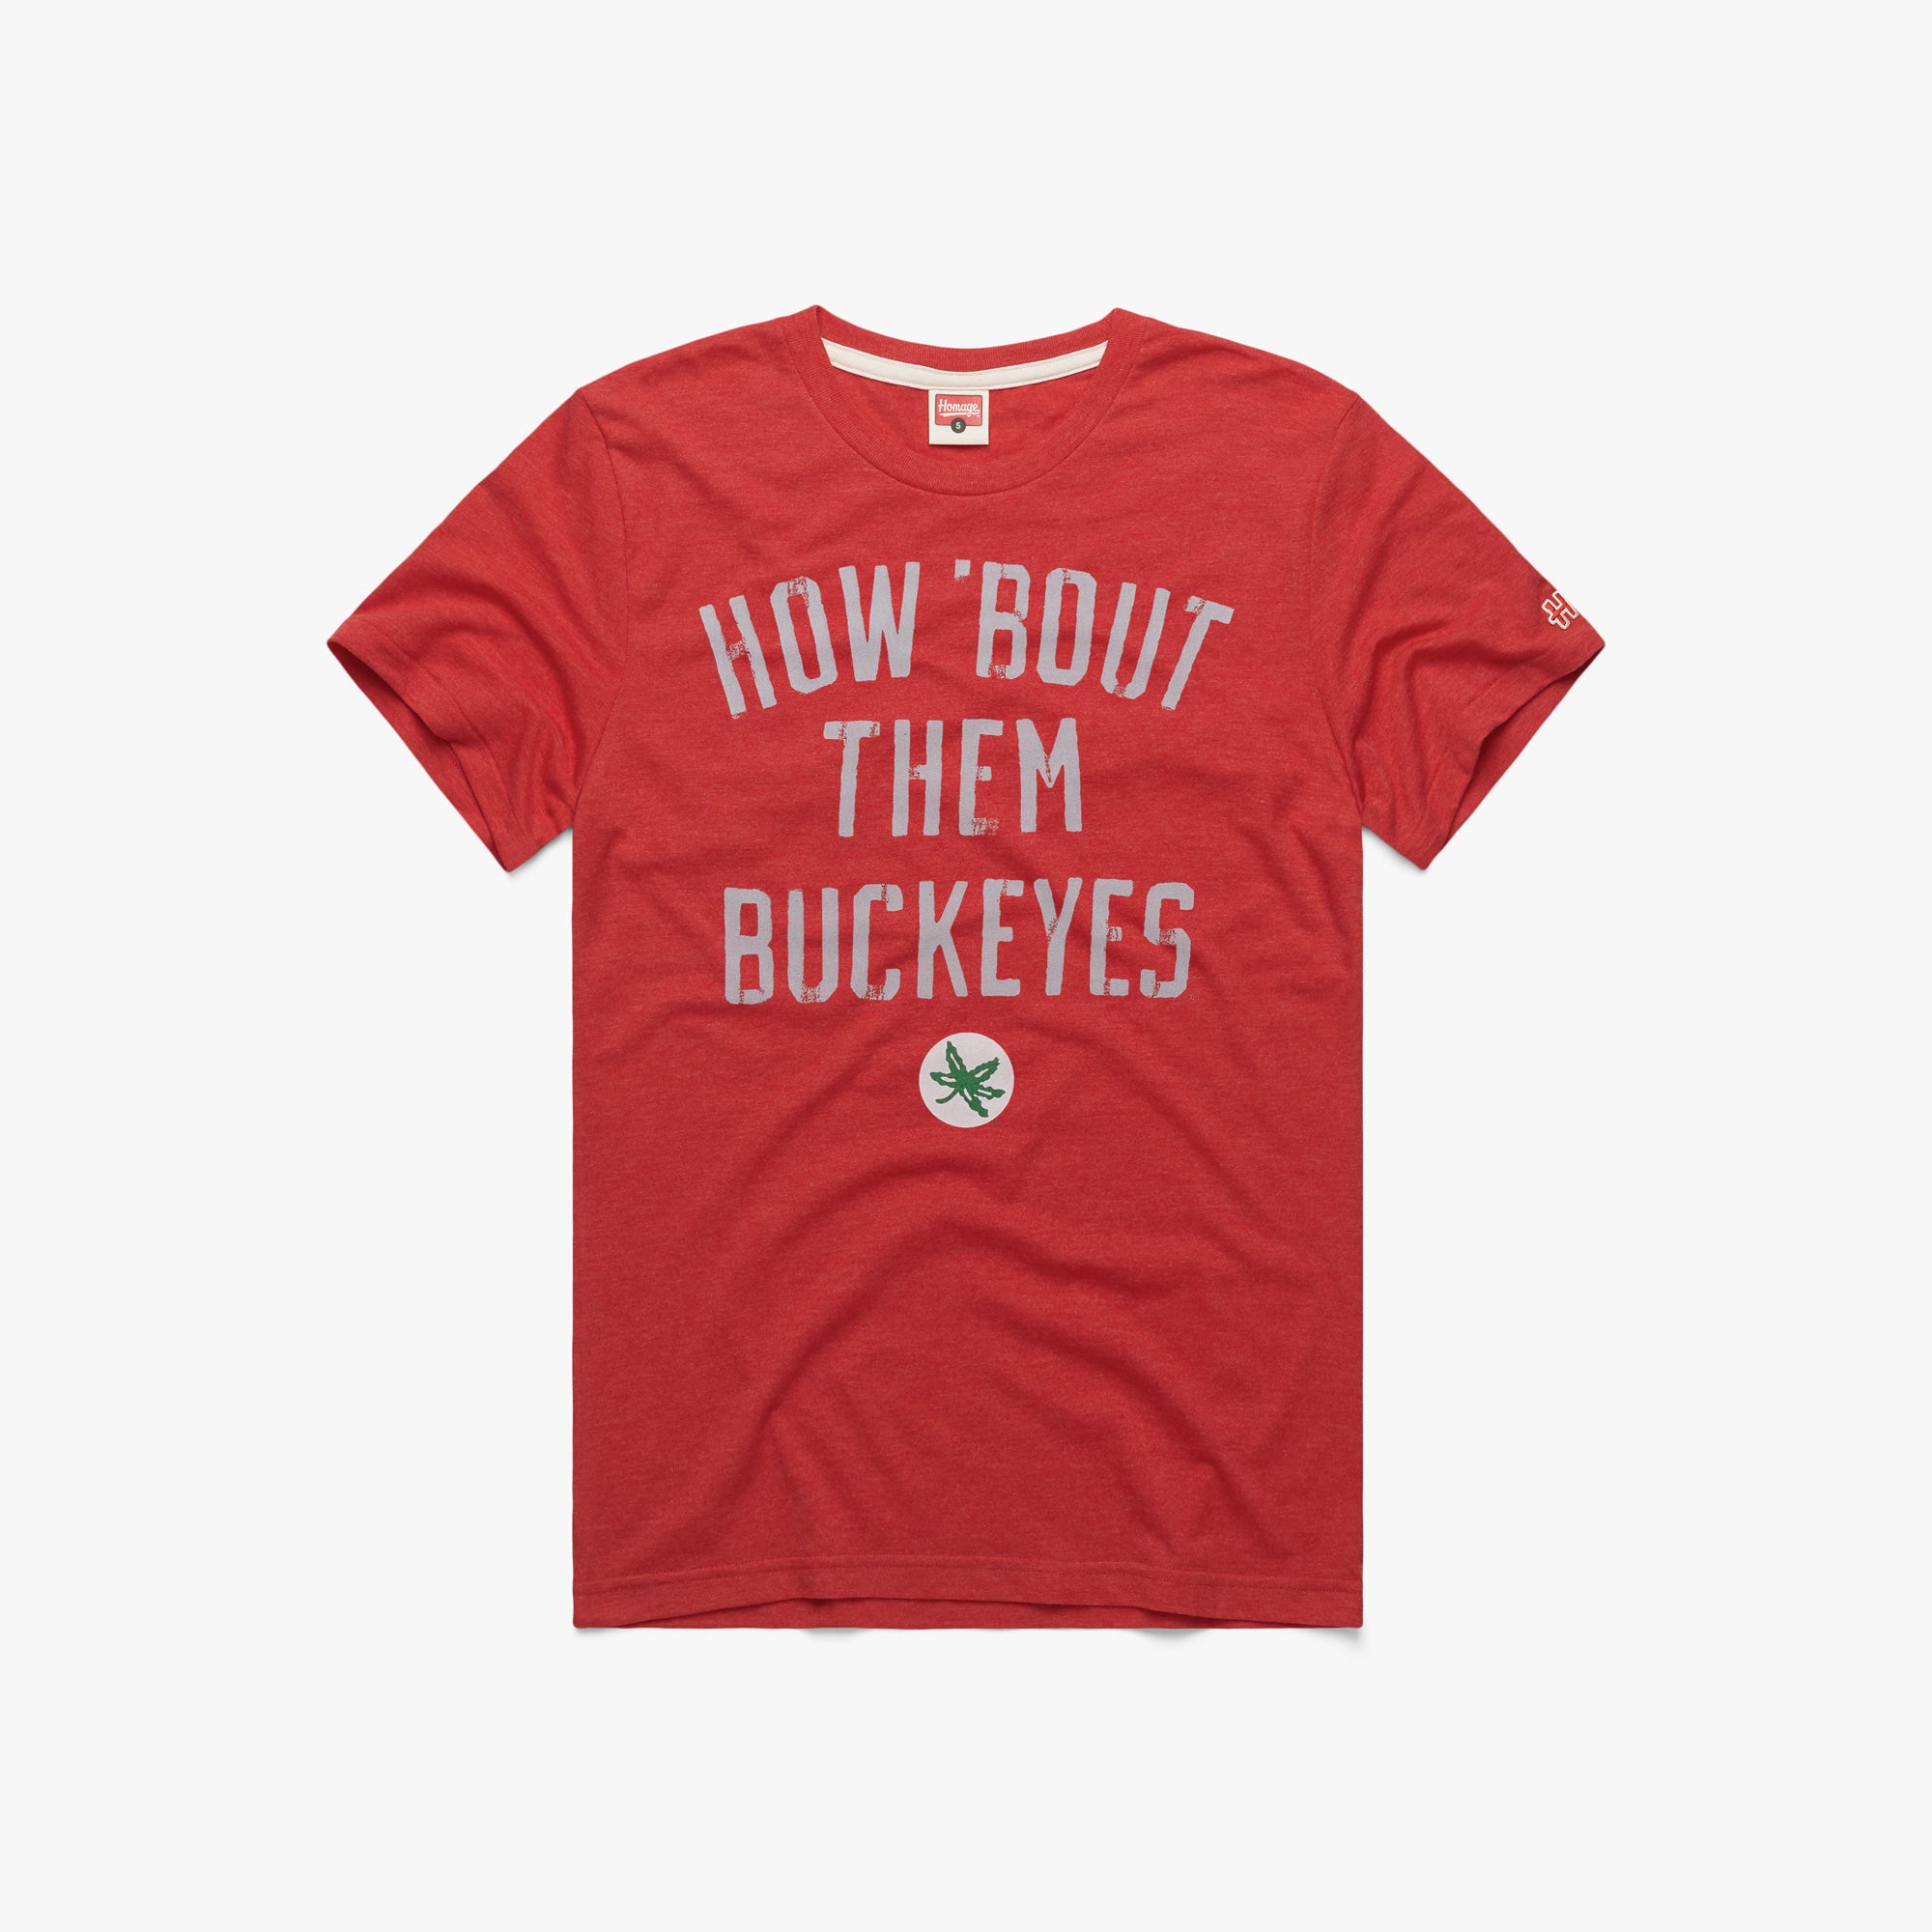 How Bout Them Buckeyes